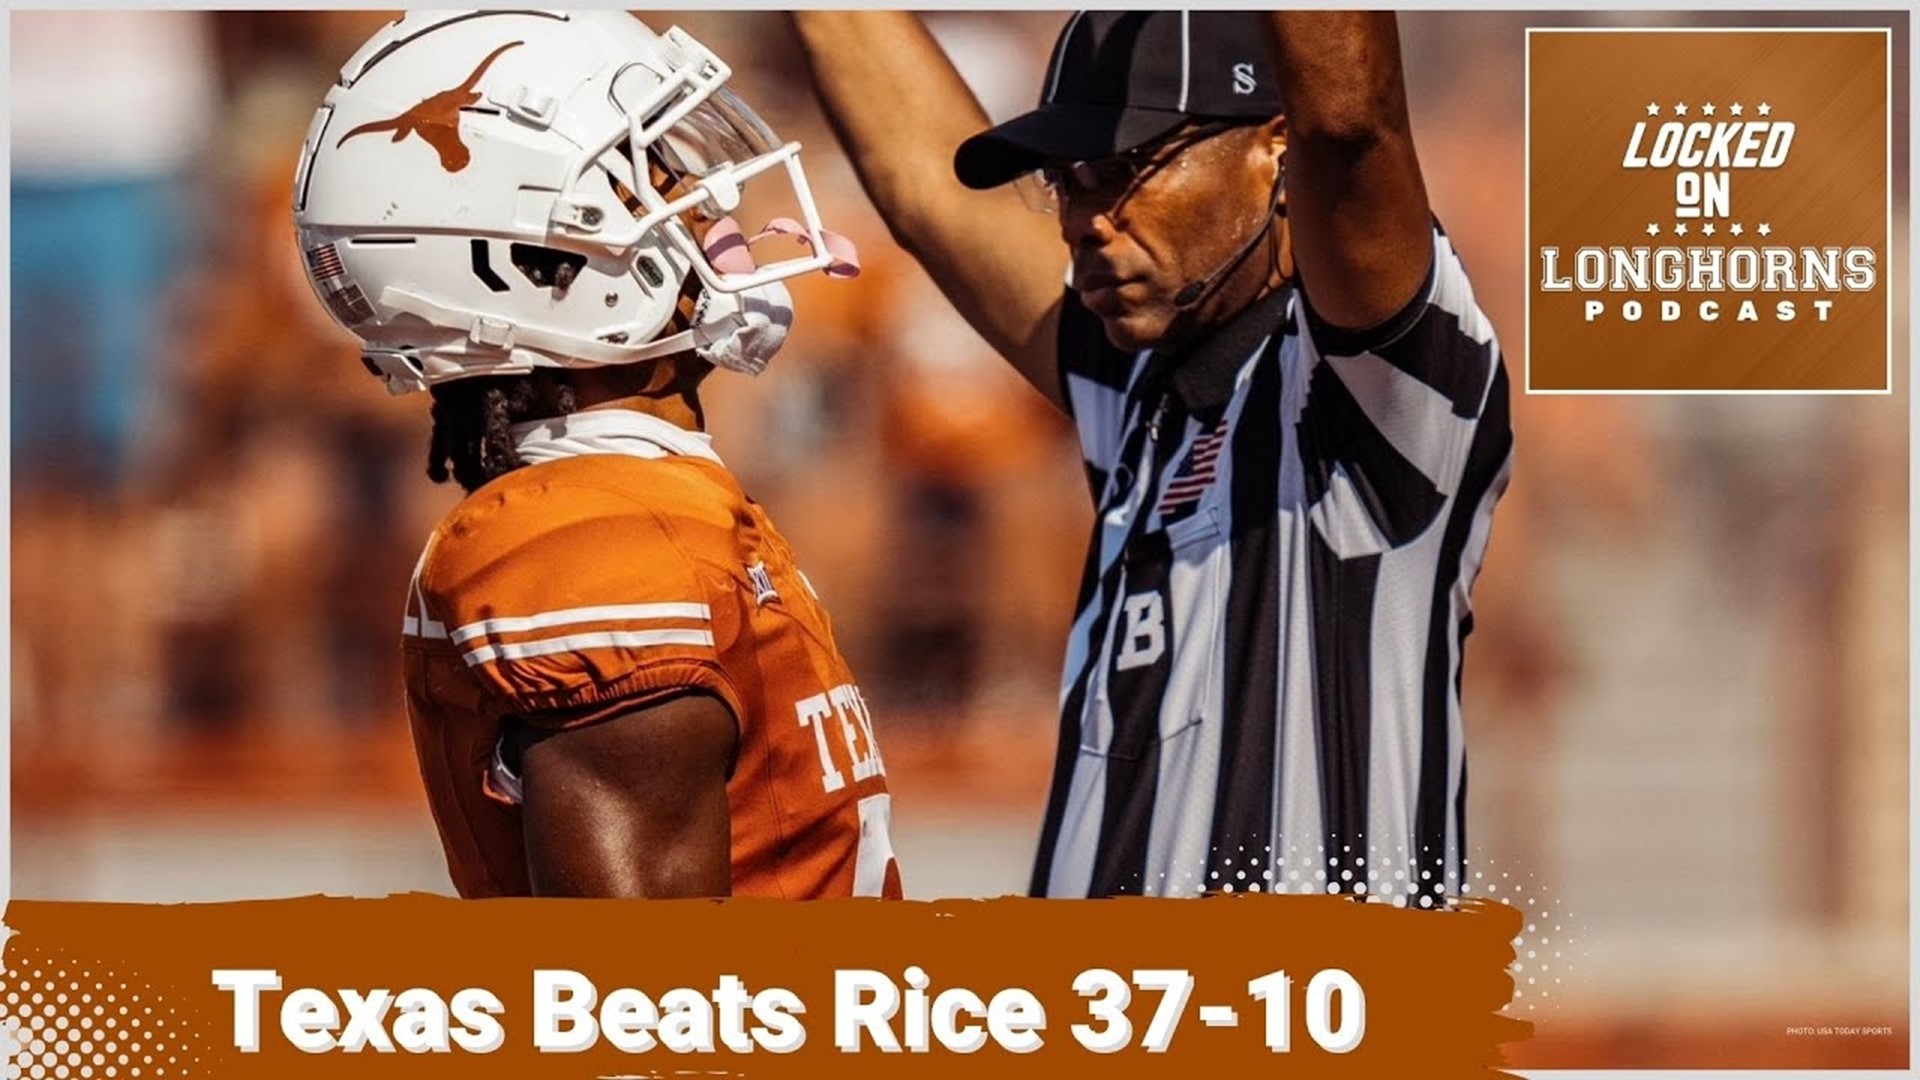 It's been over 9 months since we've had actual football to talk about, and it was a glorious weekend to say the least. Texas started 1-0 as we all anticipated